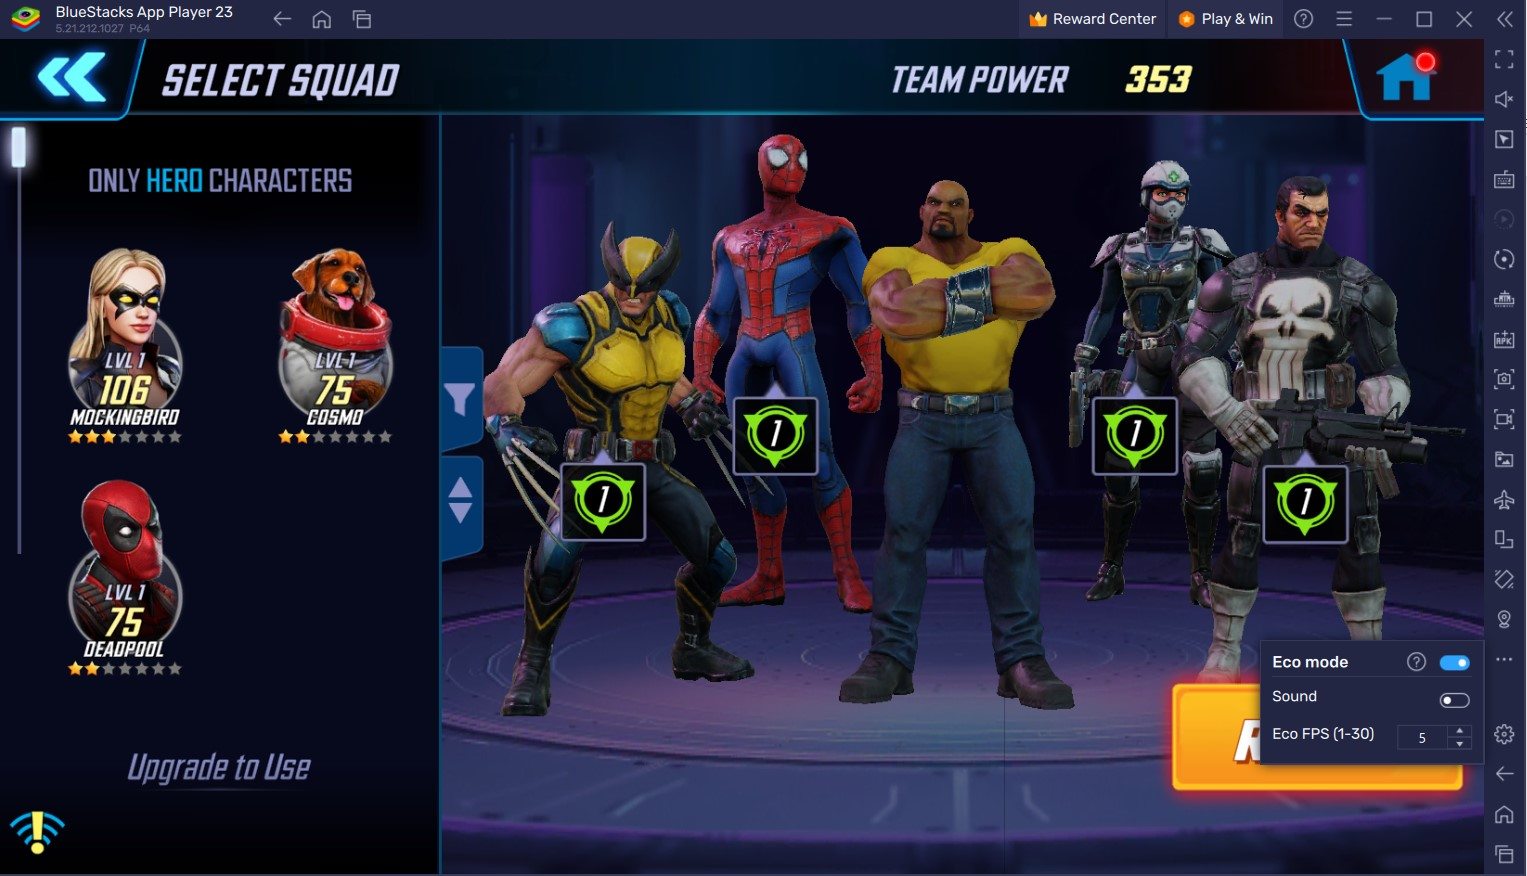 BlueStacks Features to Help you Progress Efficiently in MARVEL Strike Force